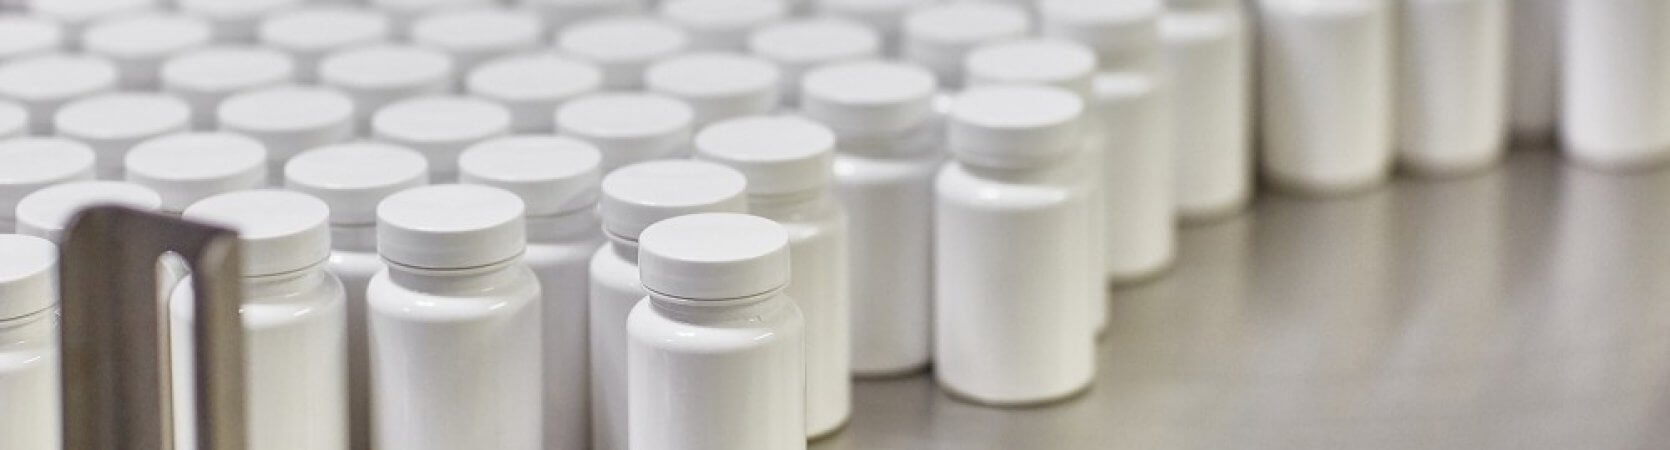 Blank pharmaceutical containers being mass produced